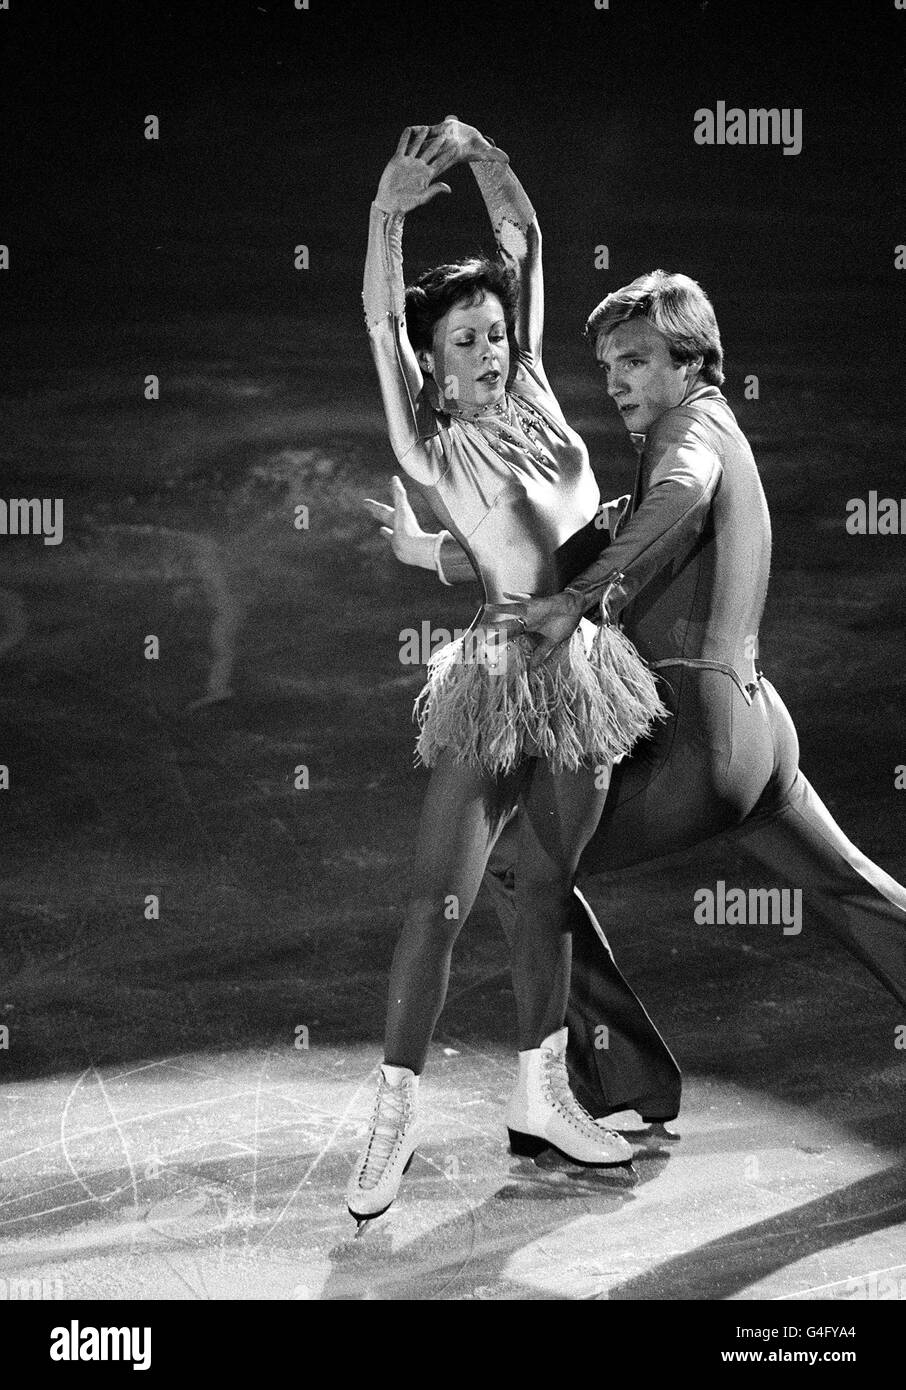 PA NEWS PHOTO 15/4/82 JAYNE TORVILL AND CHRISTOPHER DEAN IN ACTION DURING AN ICE SKATING COMPETITION IN LONDON Stock Photo